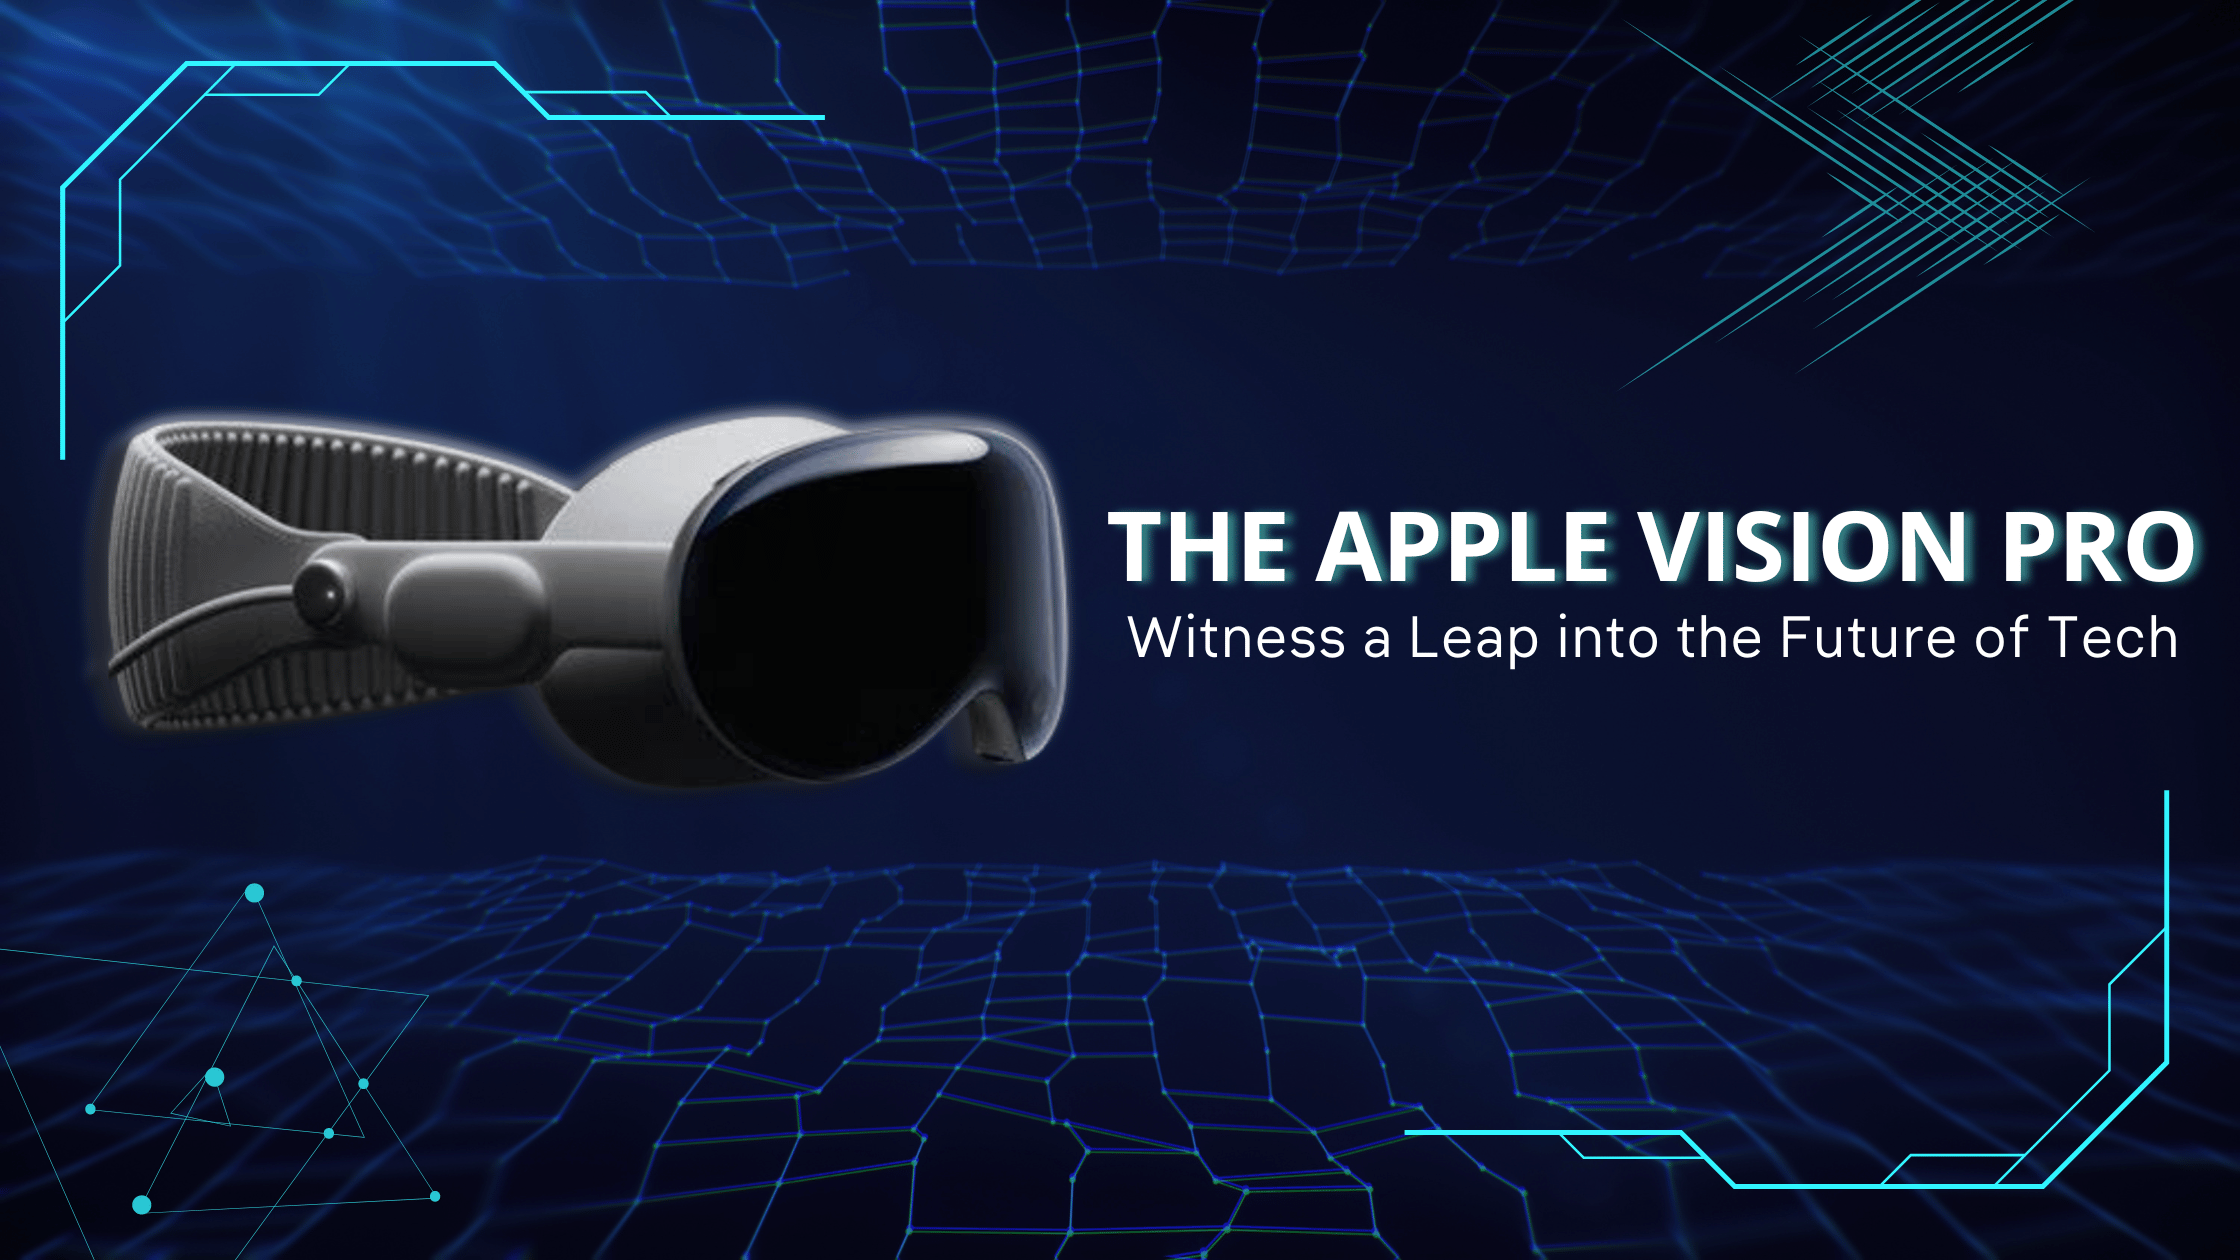 A Closer Look at the Apple Vision Pro